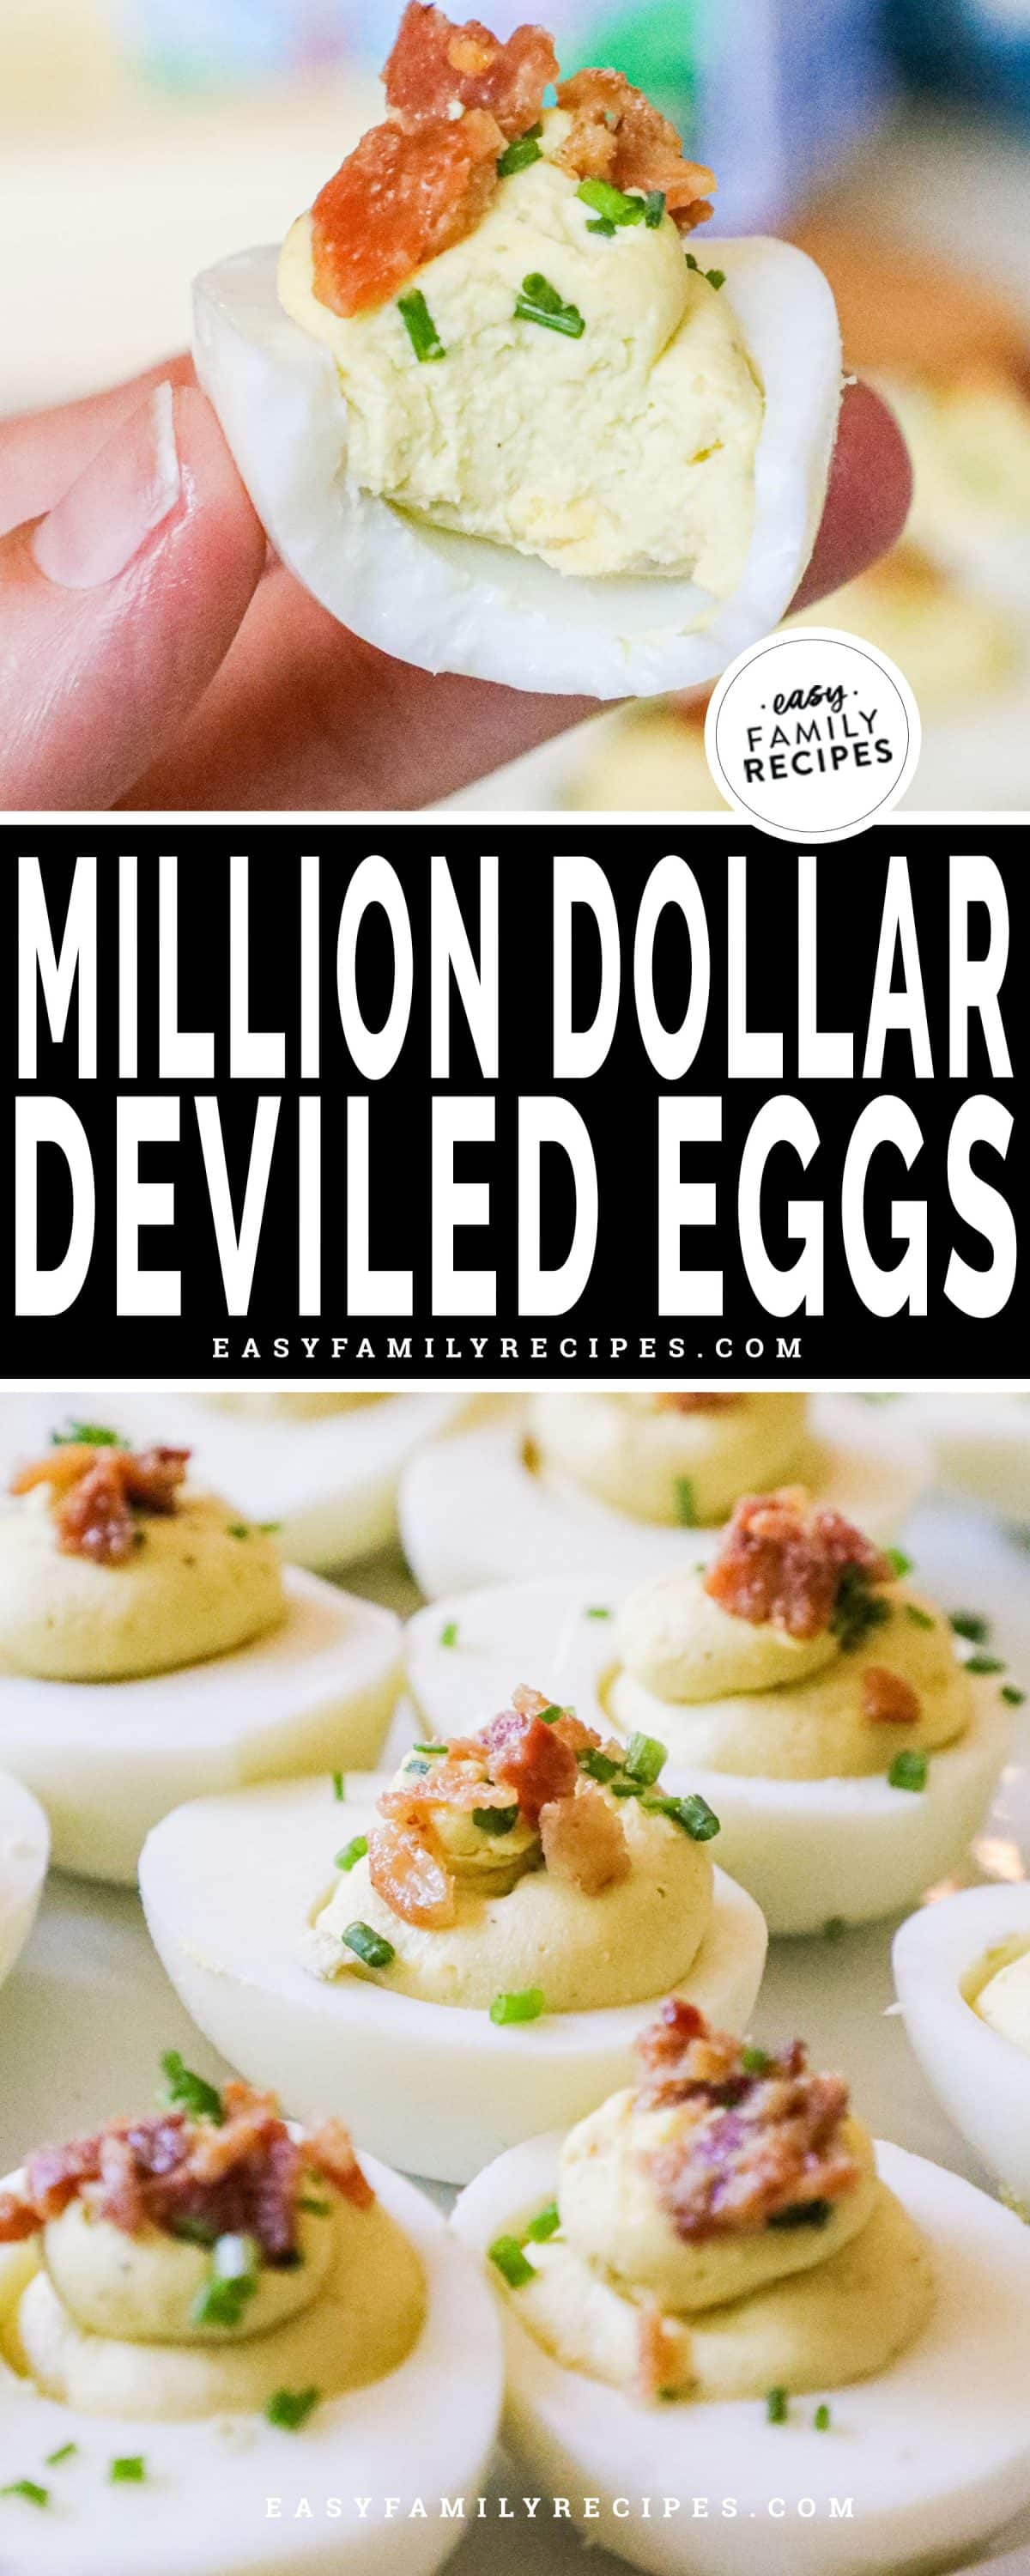 Million Dollar Deviled Egg with a bite taken out of it to reveal its creamy center.